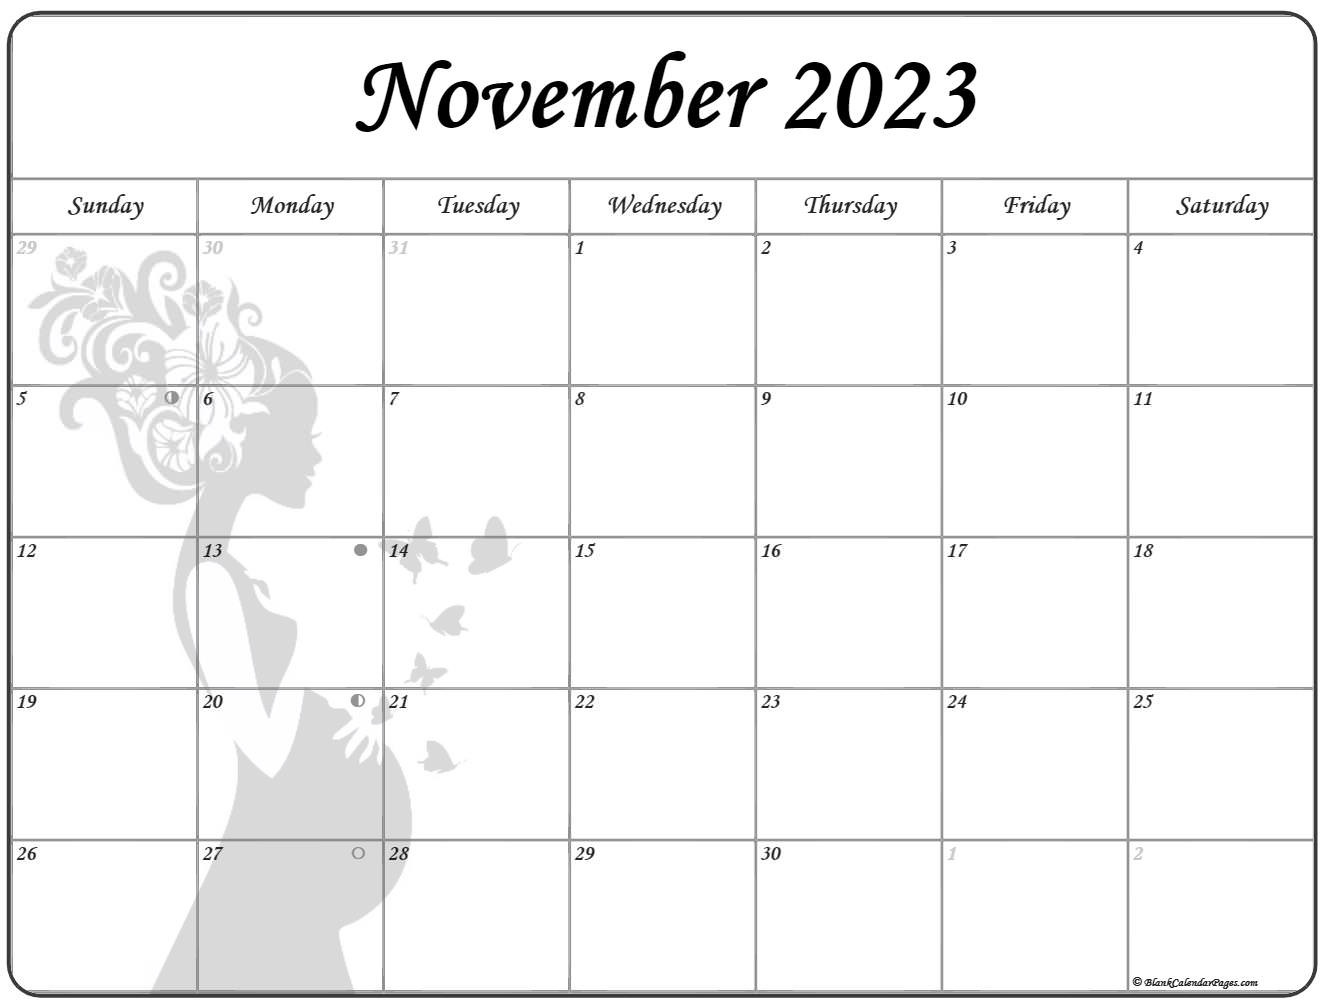 collection-of-november-2023-photo-calendars-with-image-filters